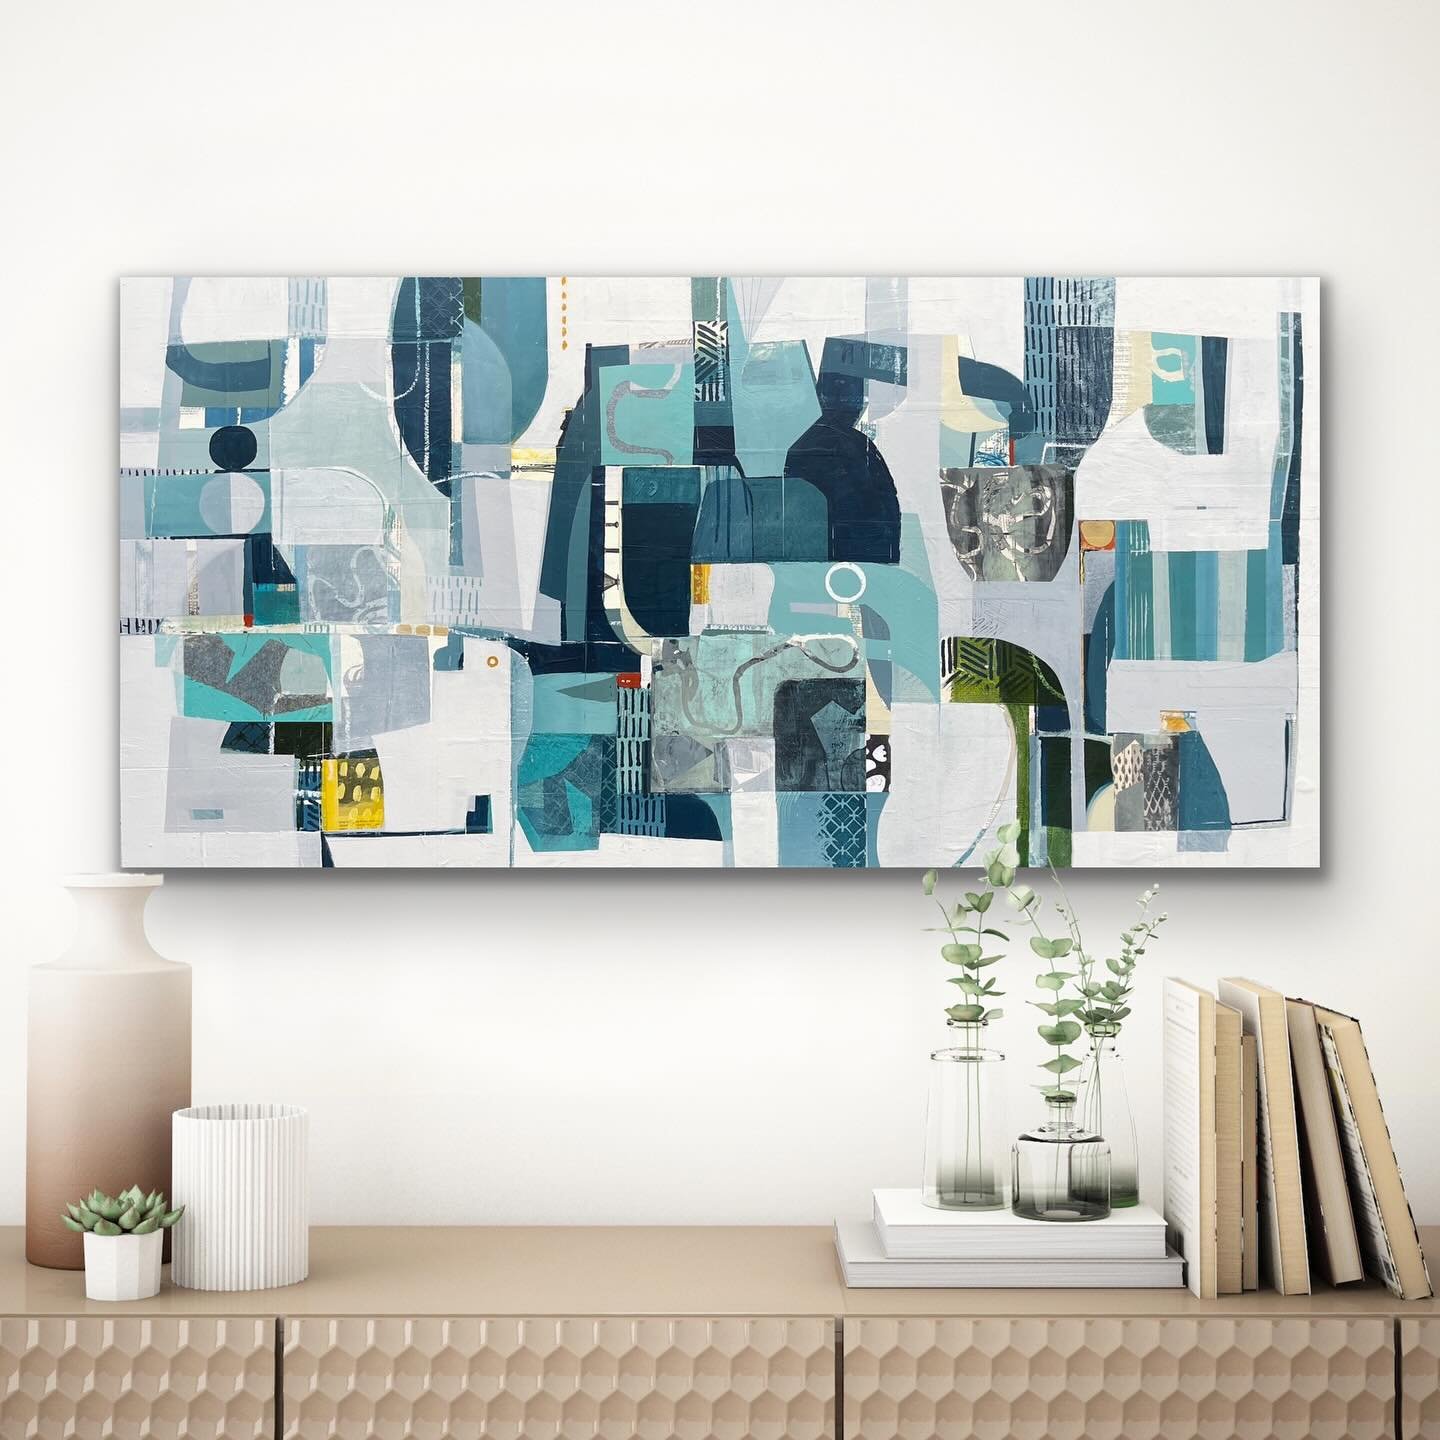 Soir&eacute;e
30&rdquo;x60&rdquo; acrylic, collage, oil stick and paint marker on panel in a virtual space. @artroomsapp swipe for closeup.

#art #maker #interiordesign #abstractart #artlovers #abstractcollage #interiordesigners #artcollectors #newco